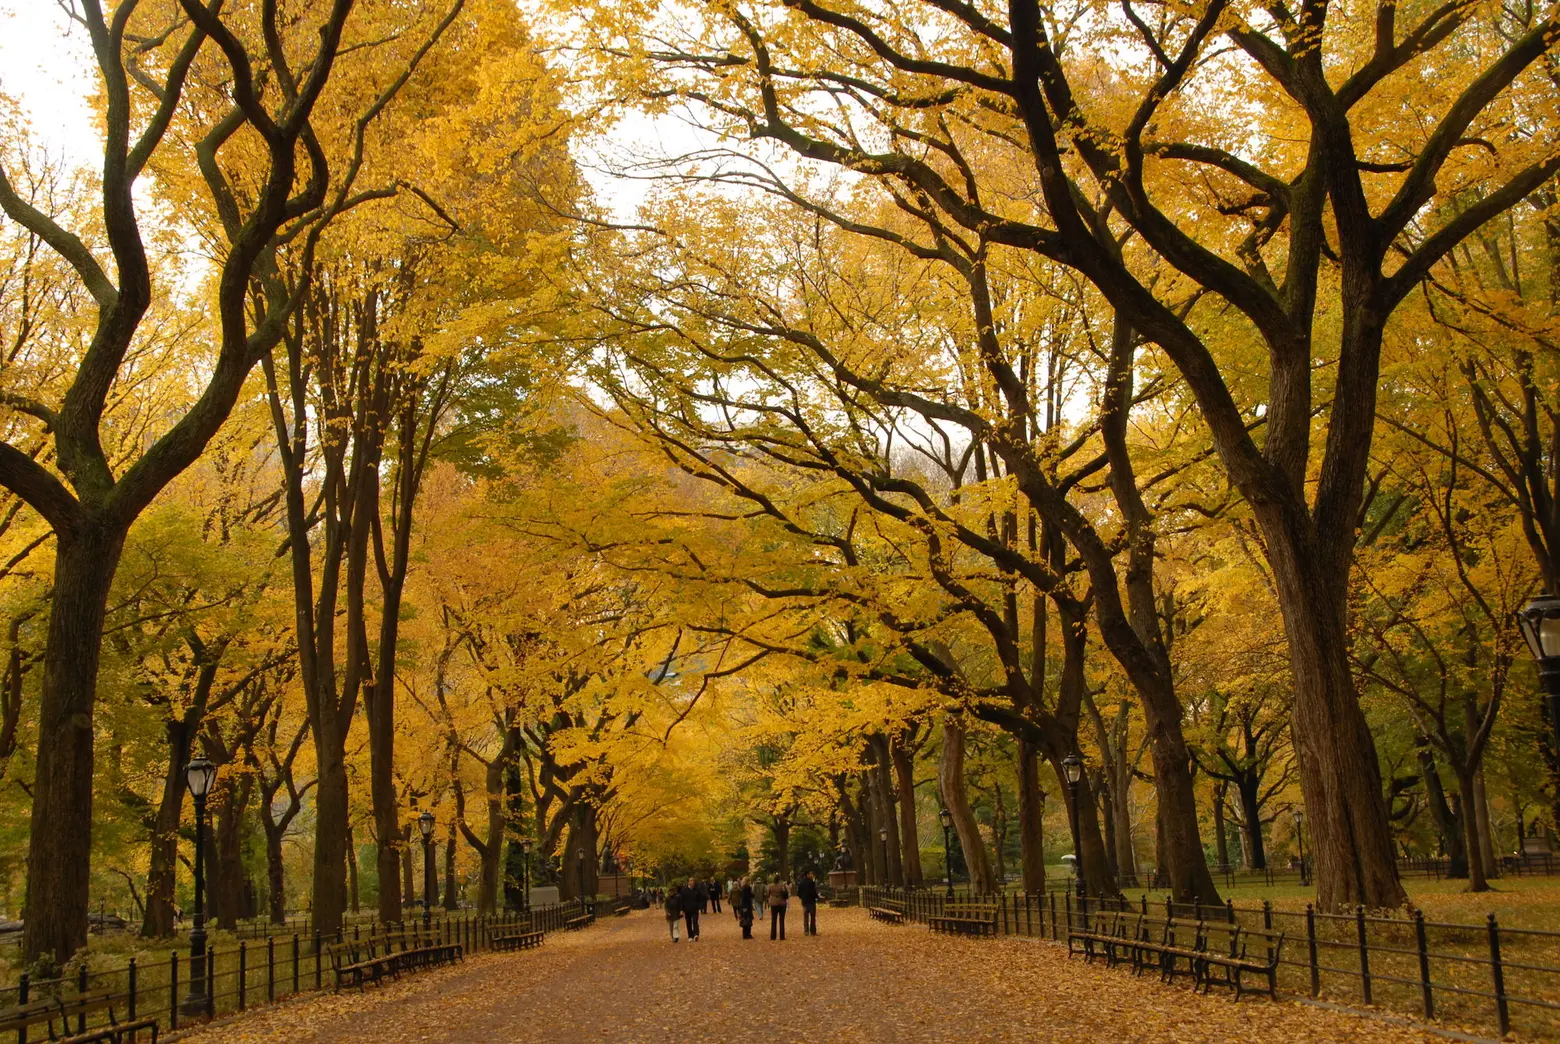 The best places in Central Park to see fall foliage